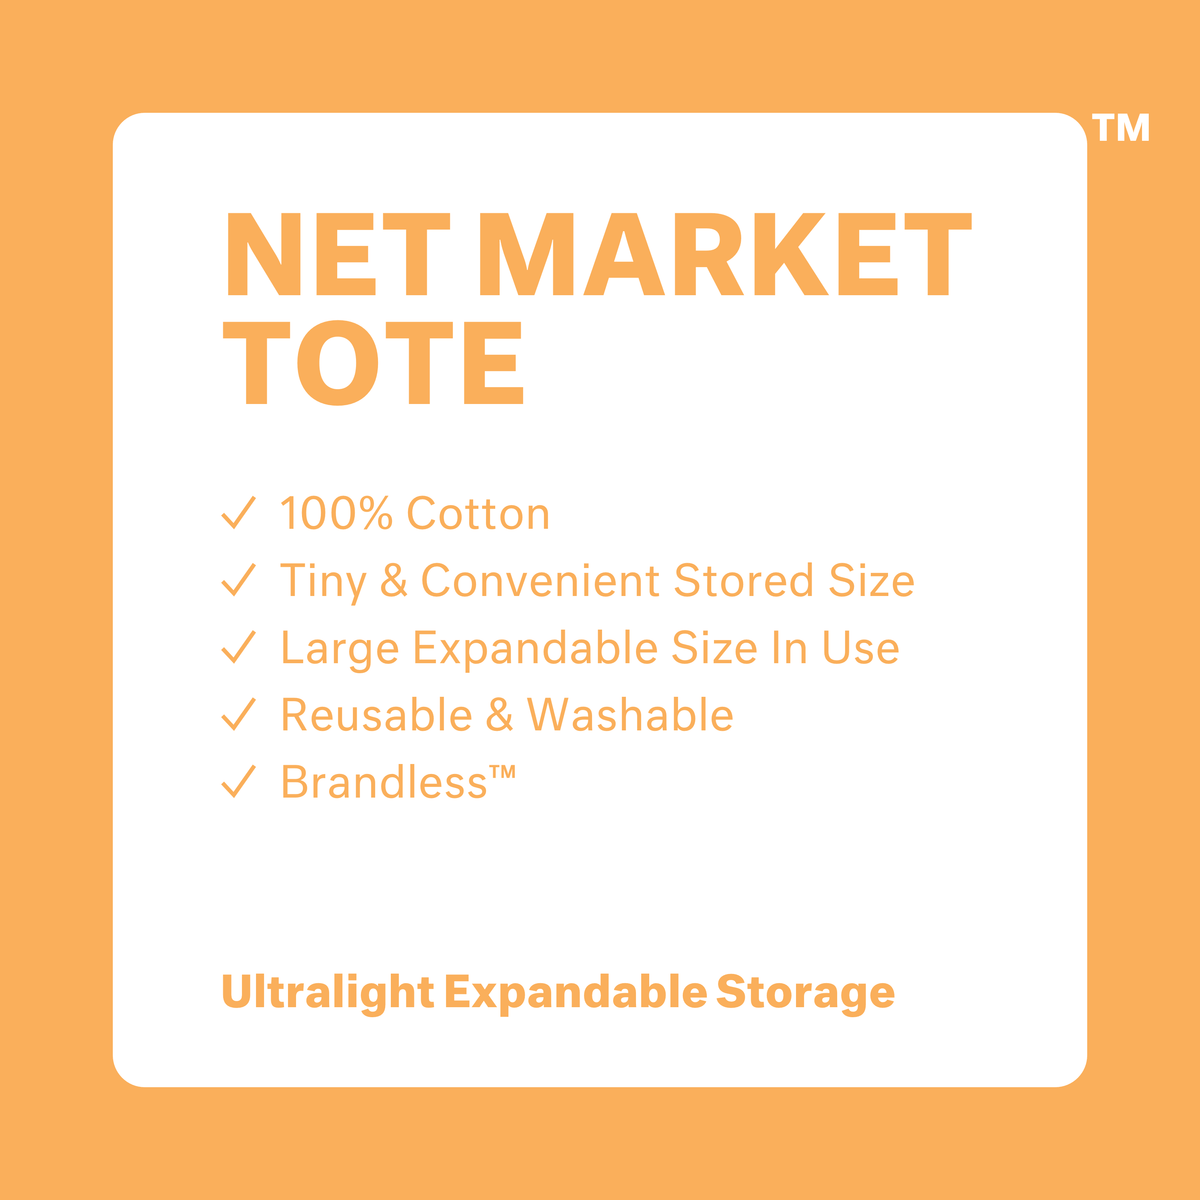 Net Market Tote: 100% cotton, tiny and convenient stored size, large expandable size in use, reusable and washable. Brandless. Ultralight expandable storage.